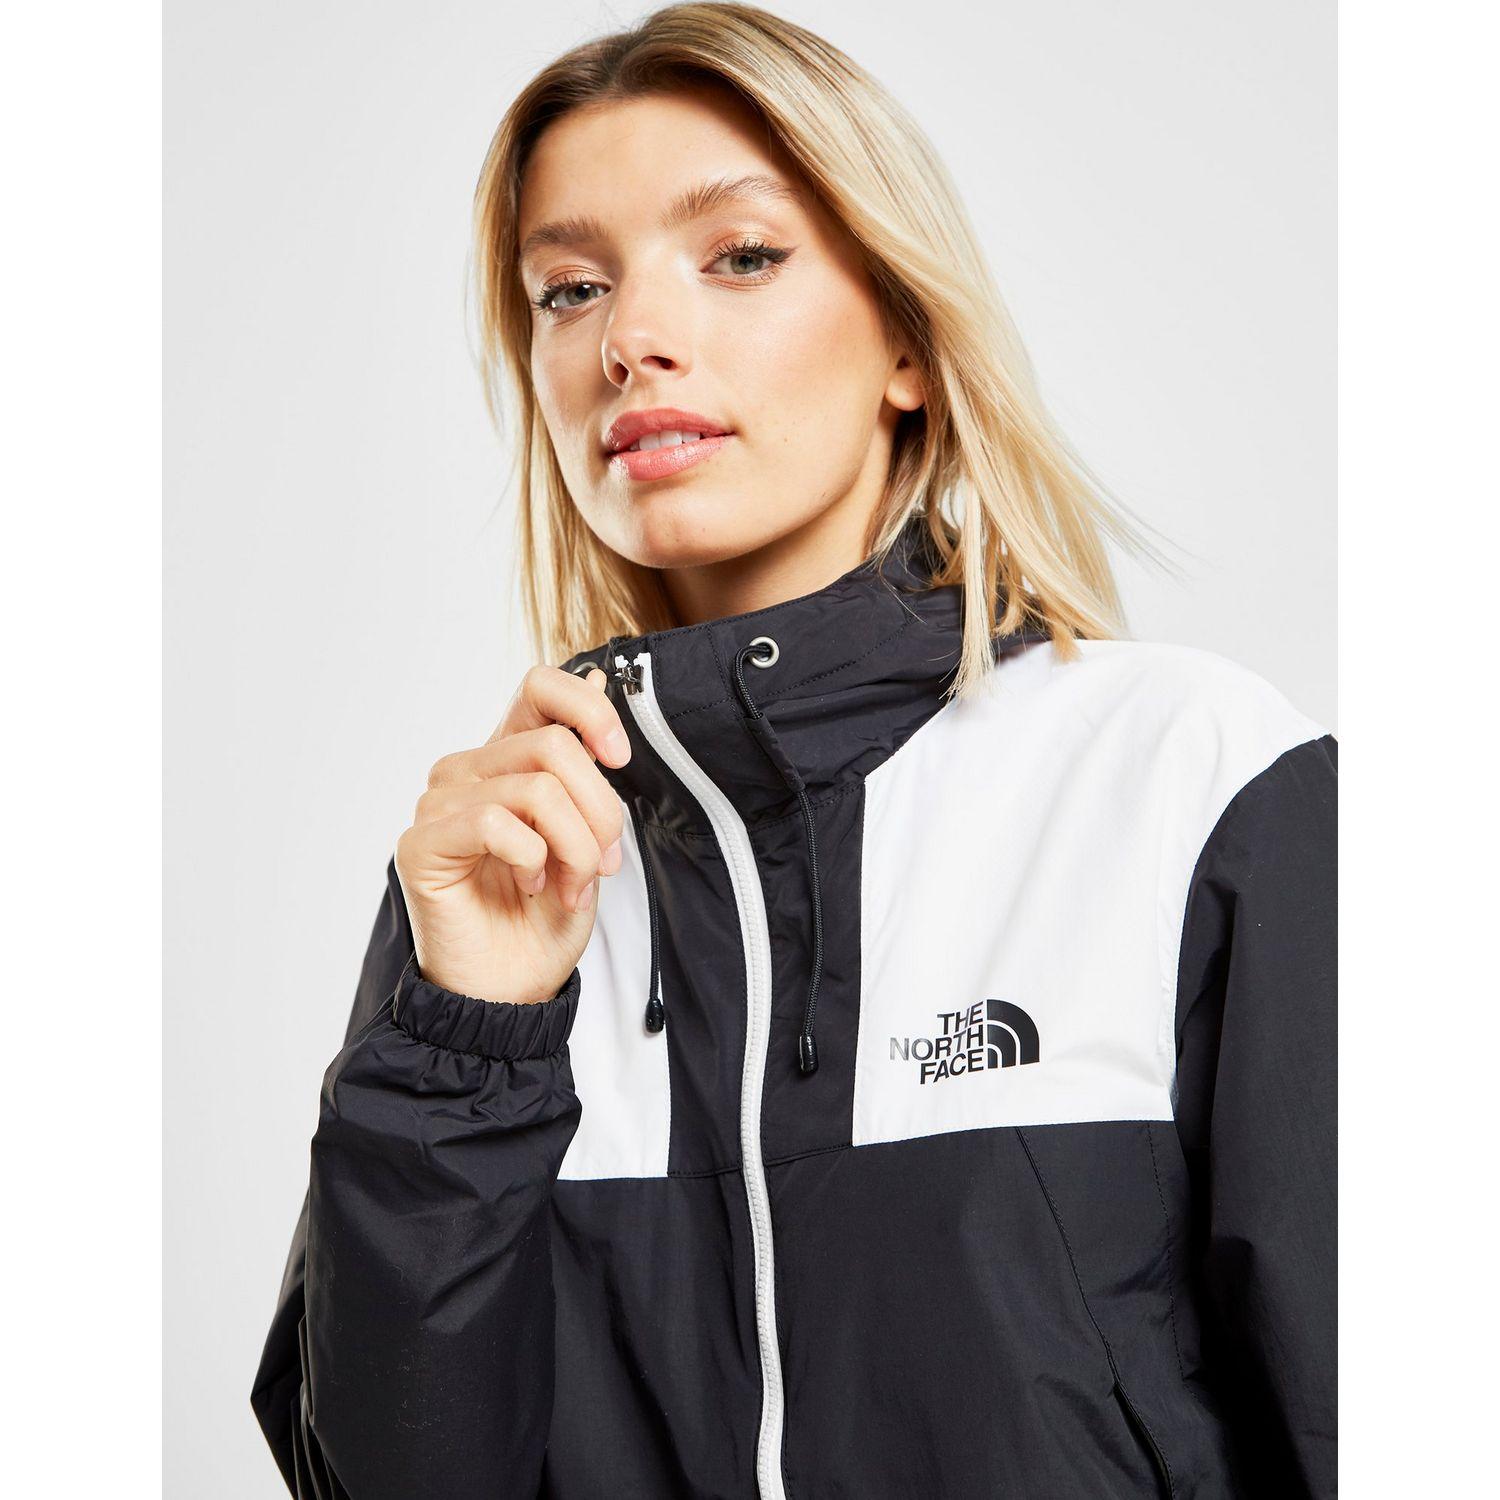 The North Face Panel Wind Jacket Online Shopping Has Never Been As Easy